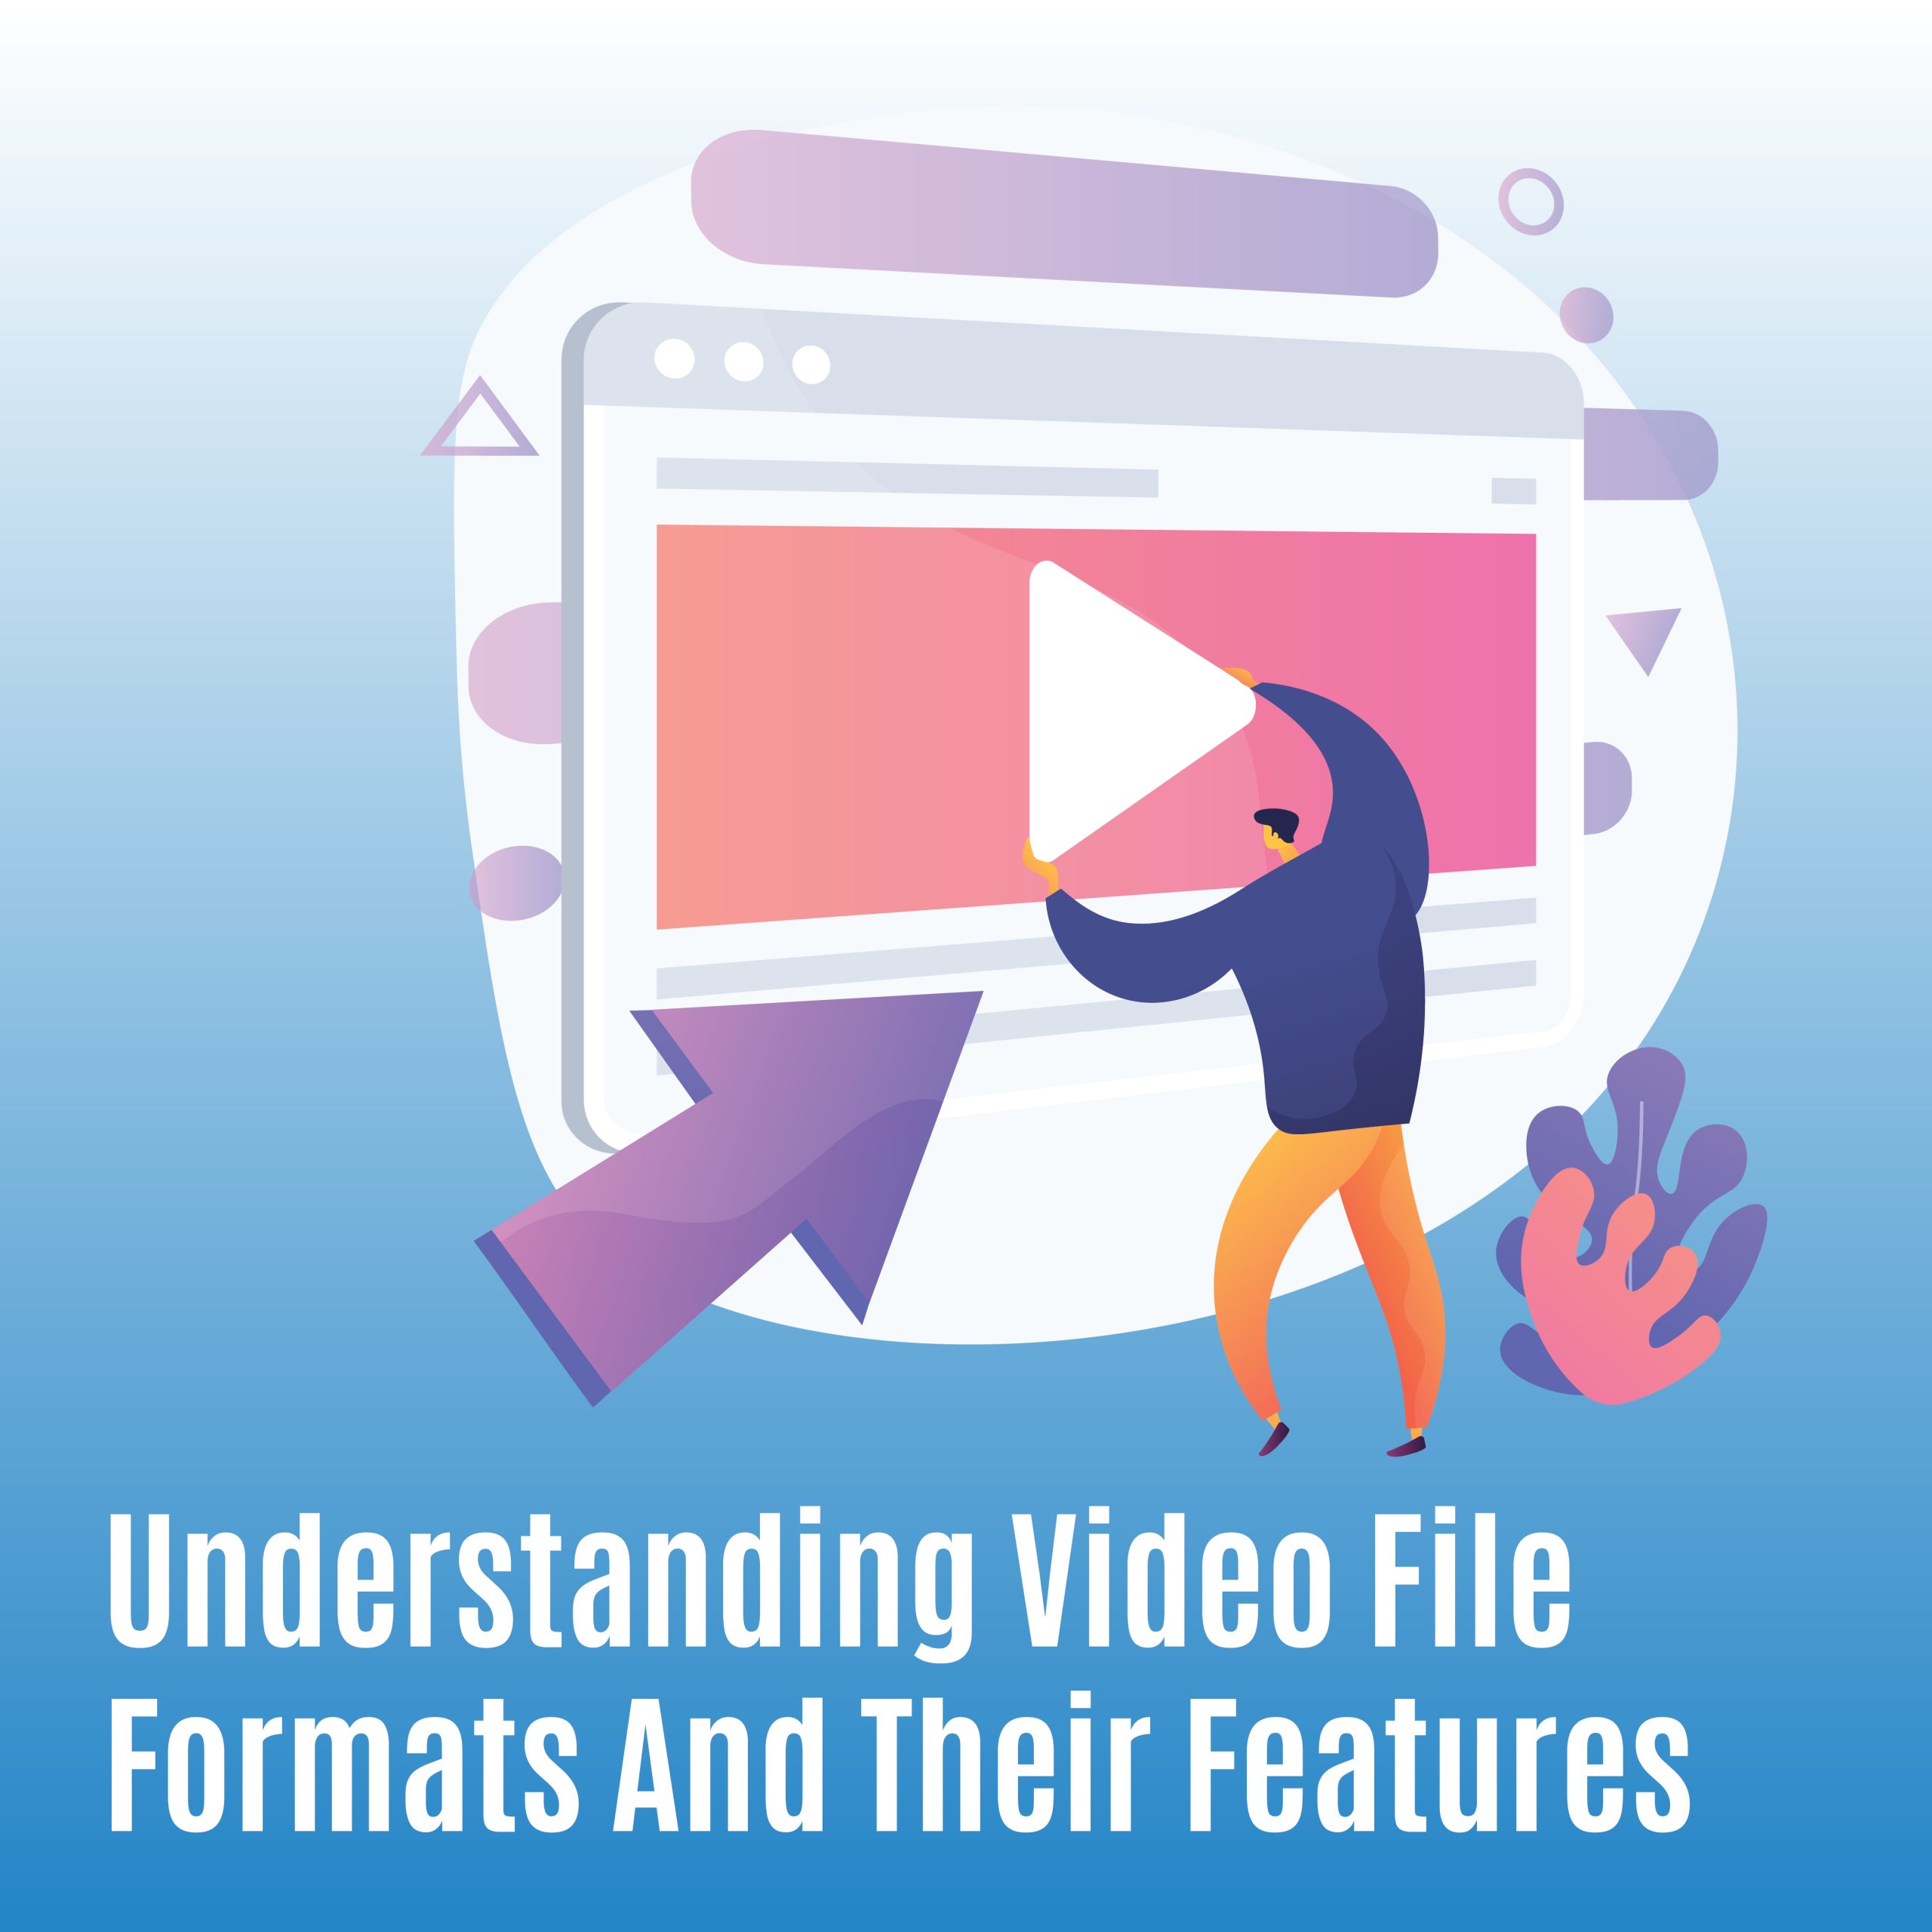 Understanding Video File Formats And Their Features